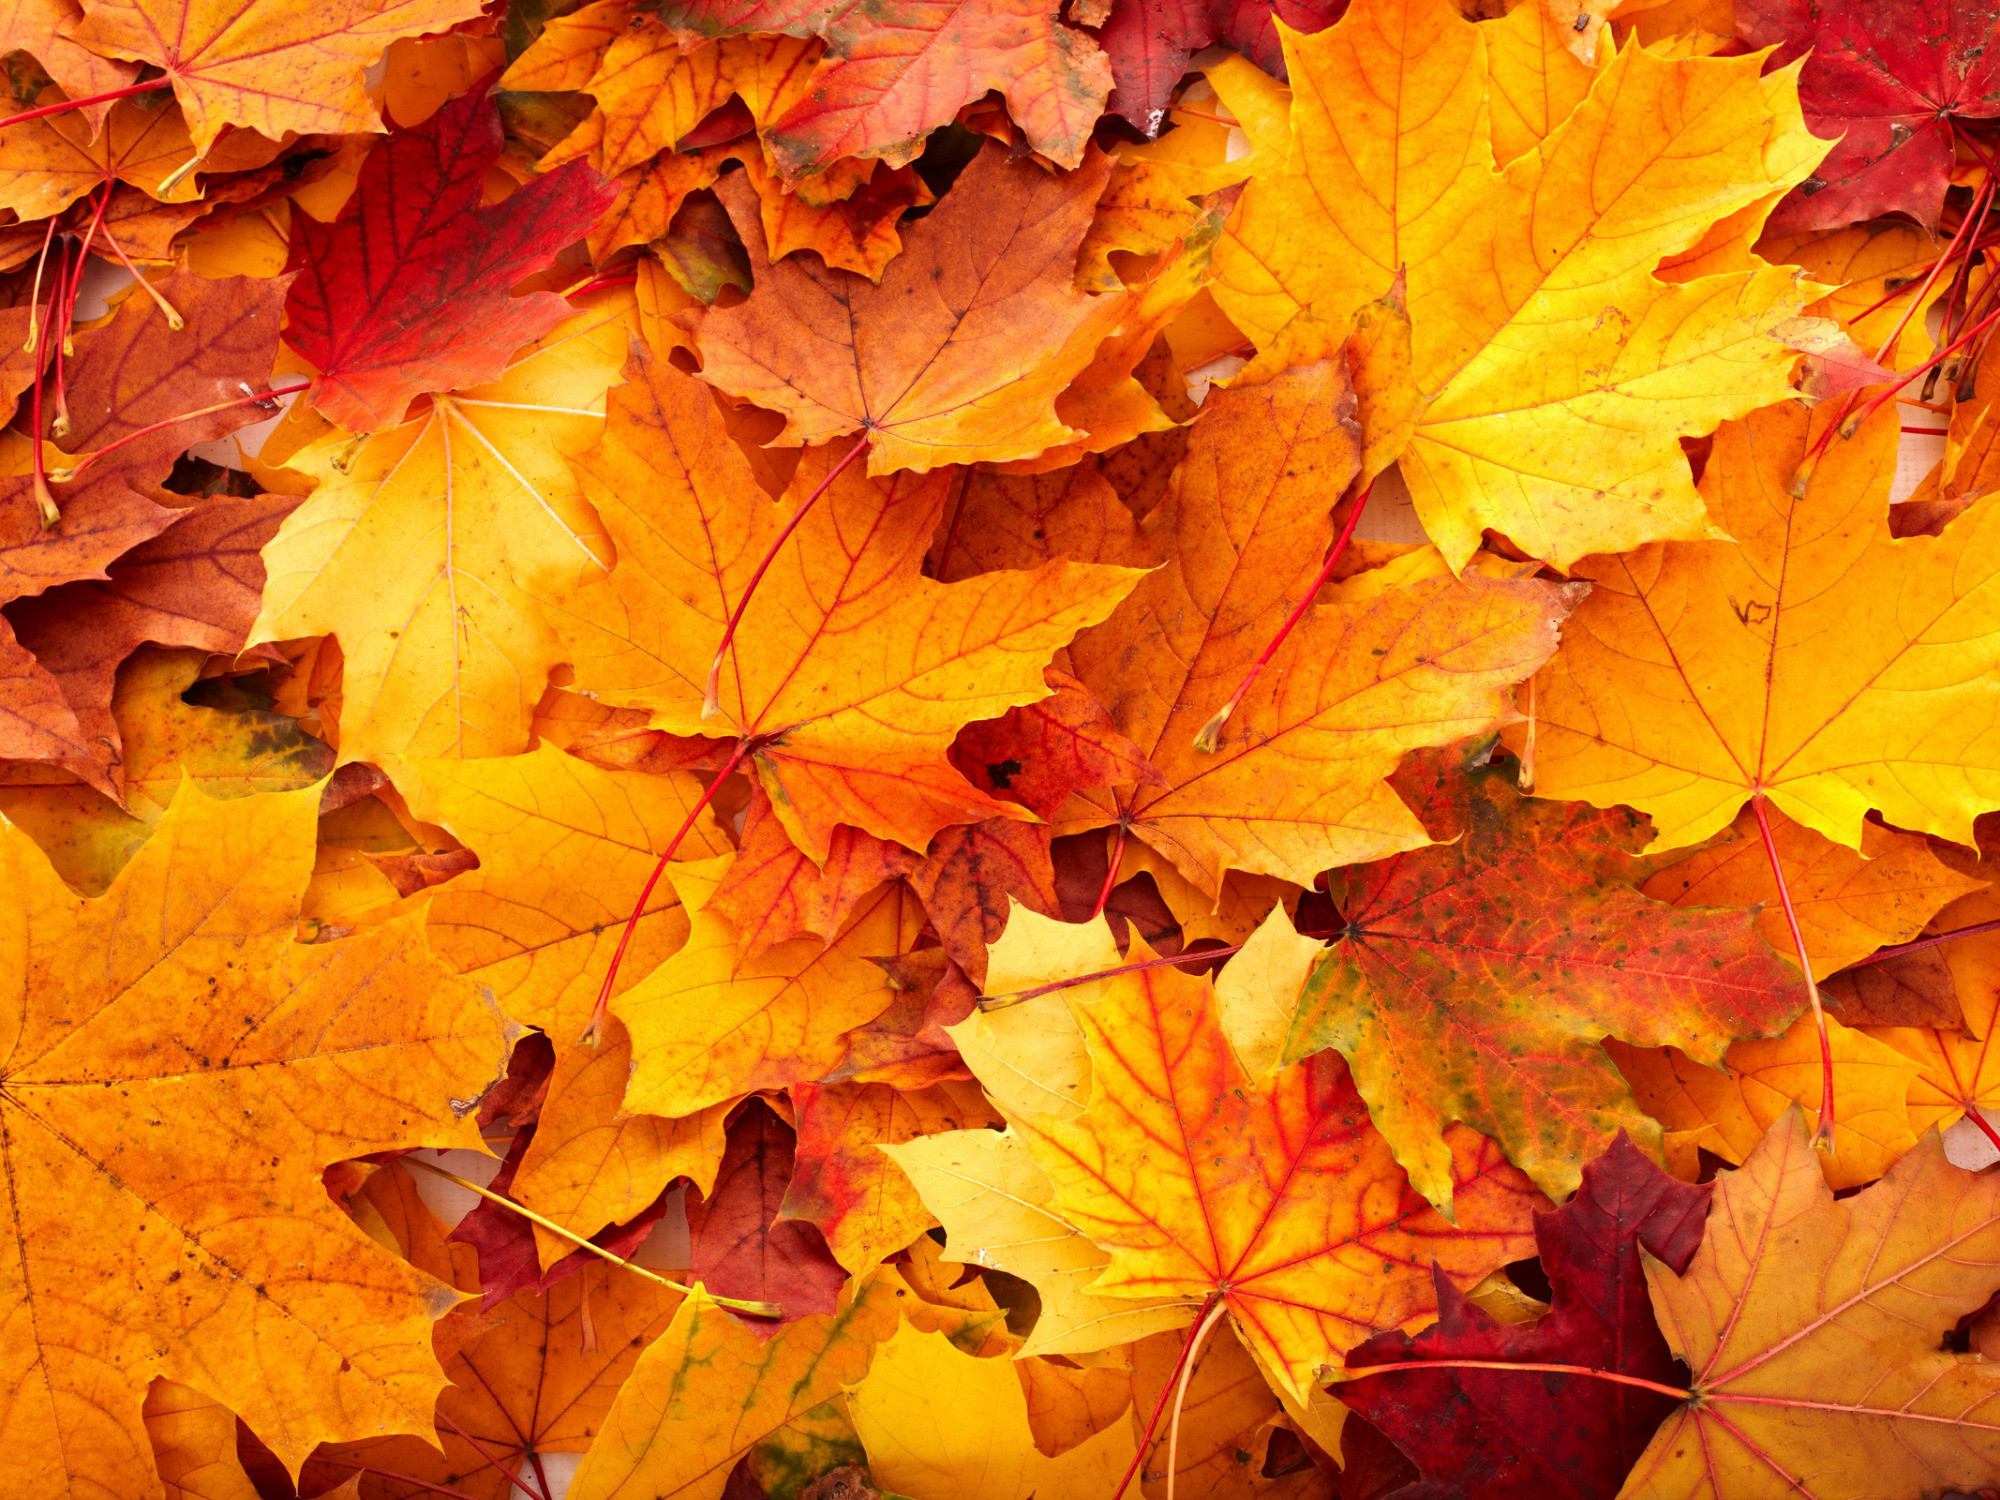 2000x1500 autumn-leaves-wallpapers-with-yellow-color-leaves-beautiful-autumn-wallpaper -for-interior-wall-decor-idea-fall-scenery-backgrounds-fall-leaves-desktop-  ...